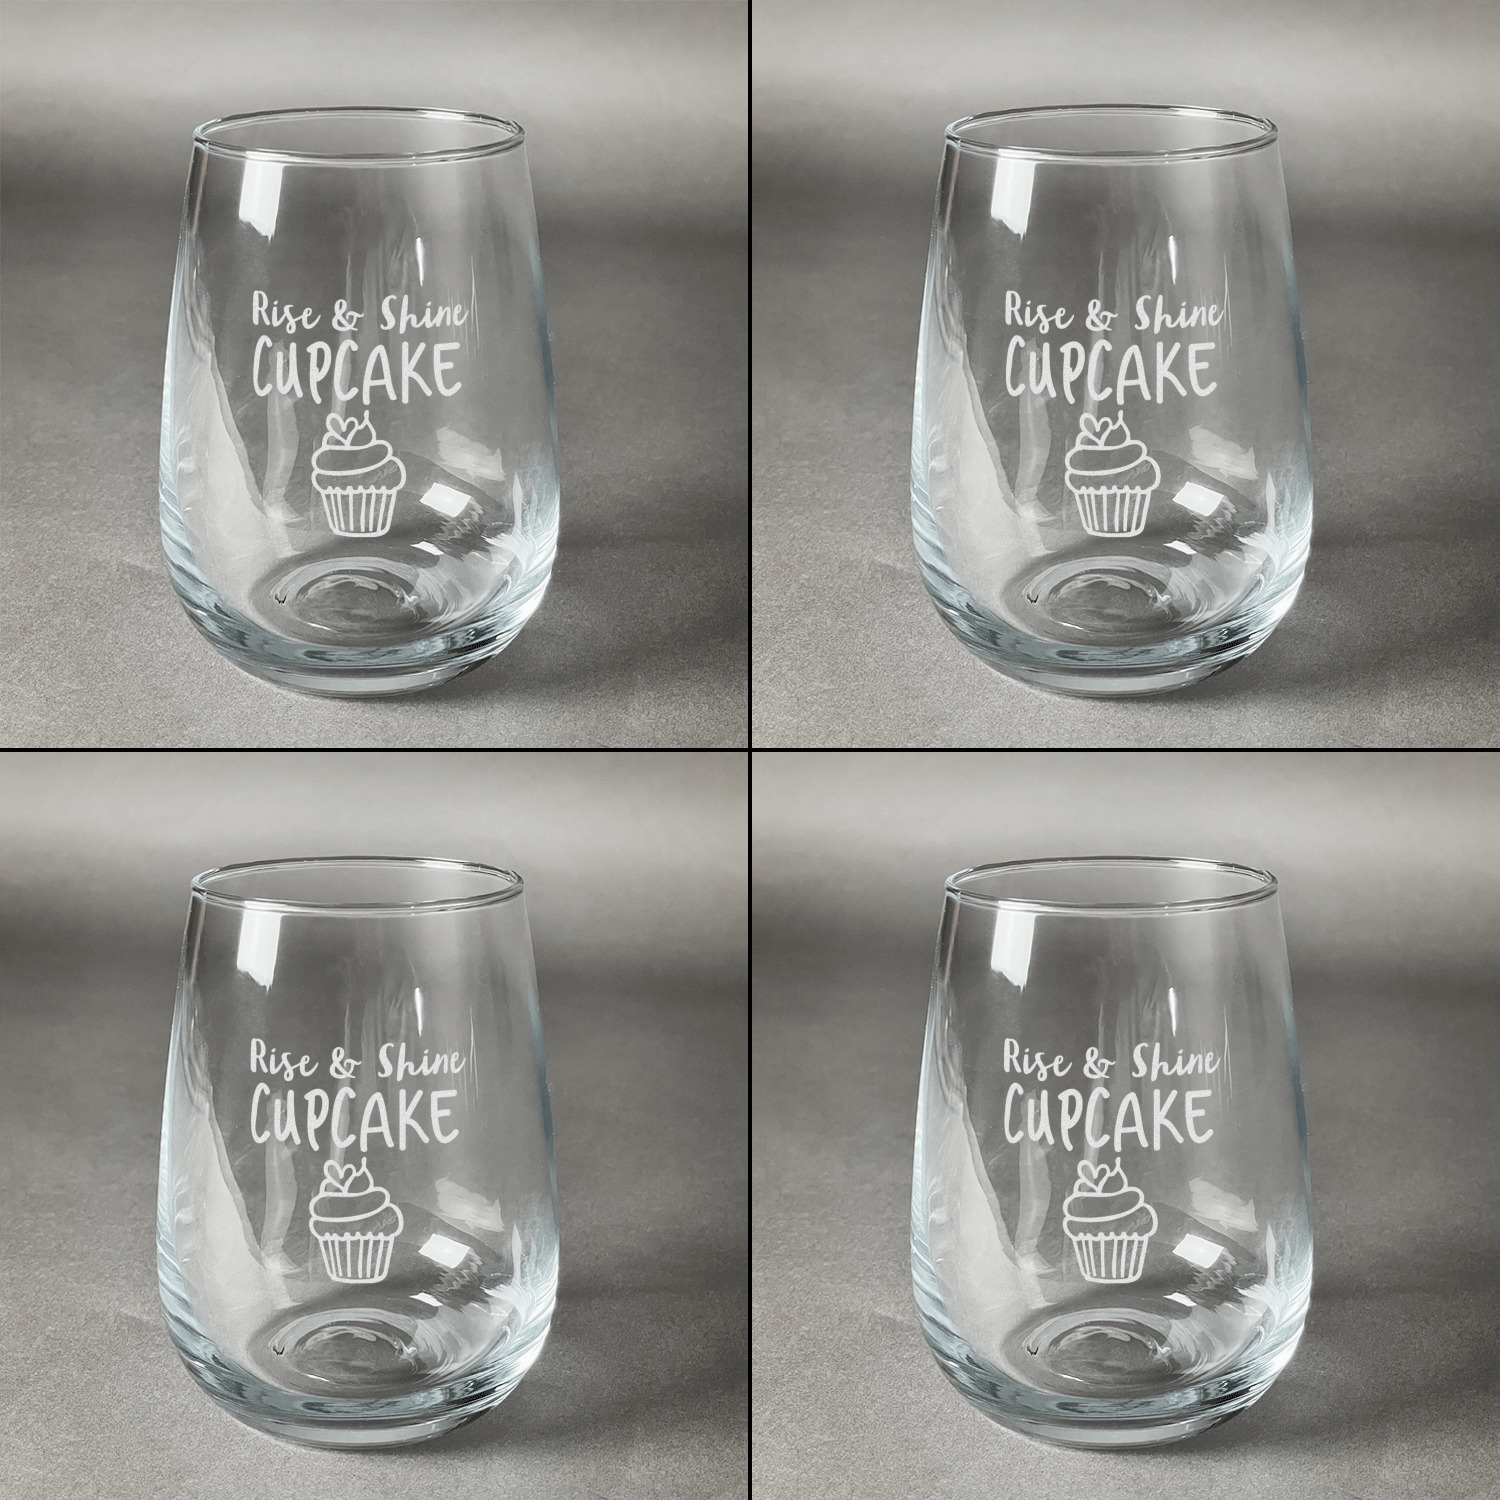 https://www.youcustomizeit.com/common/MAKE/1038068/Cute-Quotes-and-Sayings-Set-of-Four-Personalized-Stemless-Wineglasses-Approval.jpg?lm=1682543512